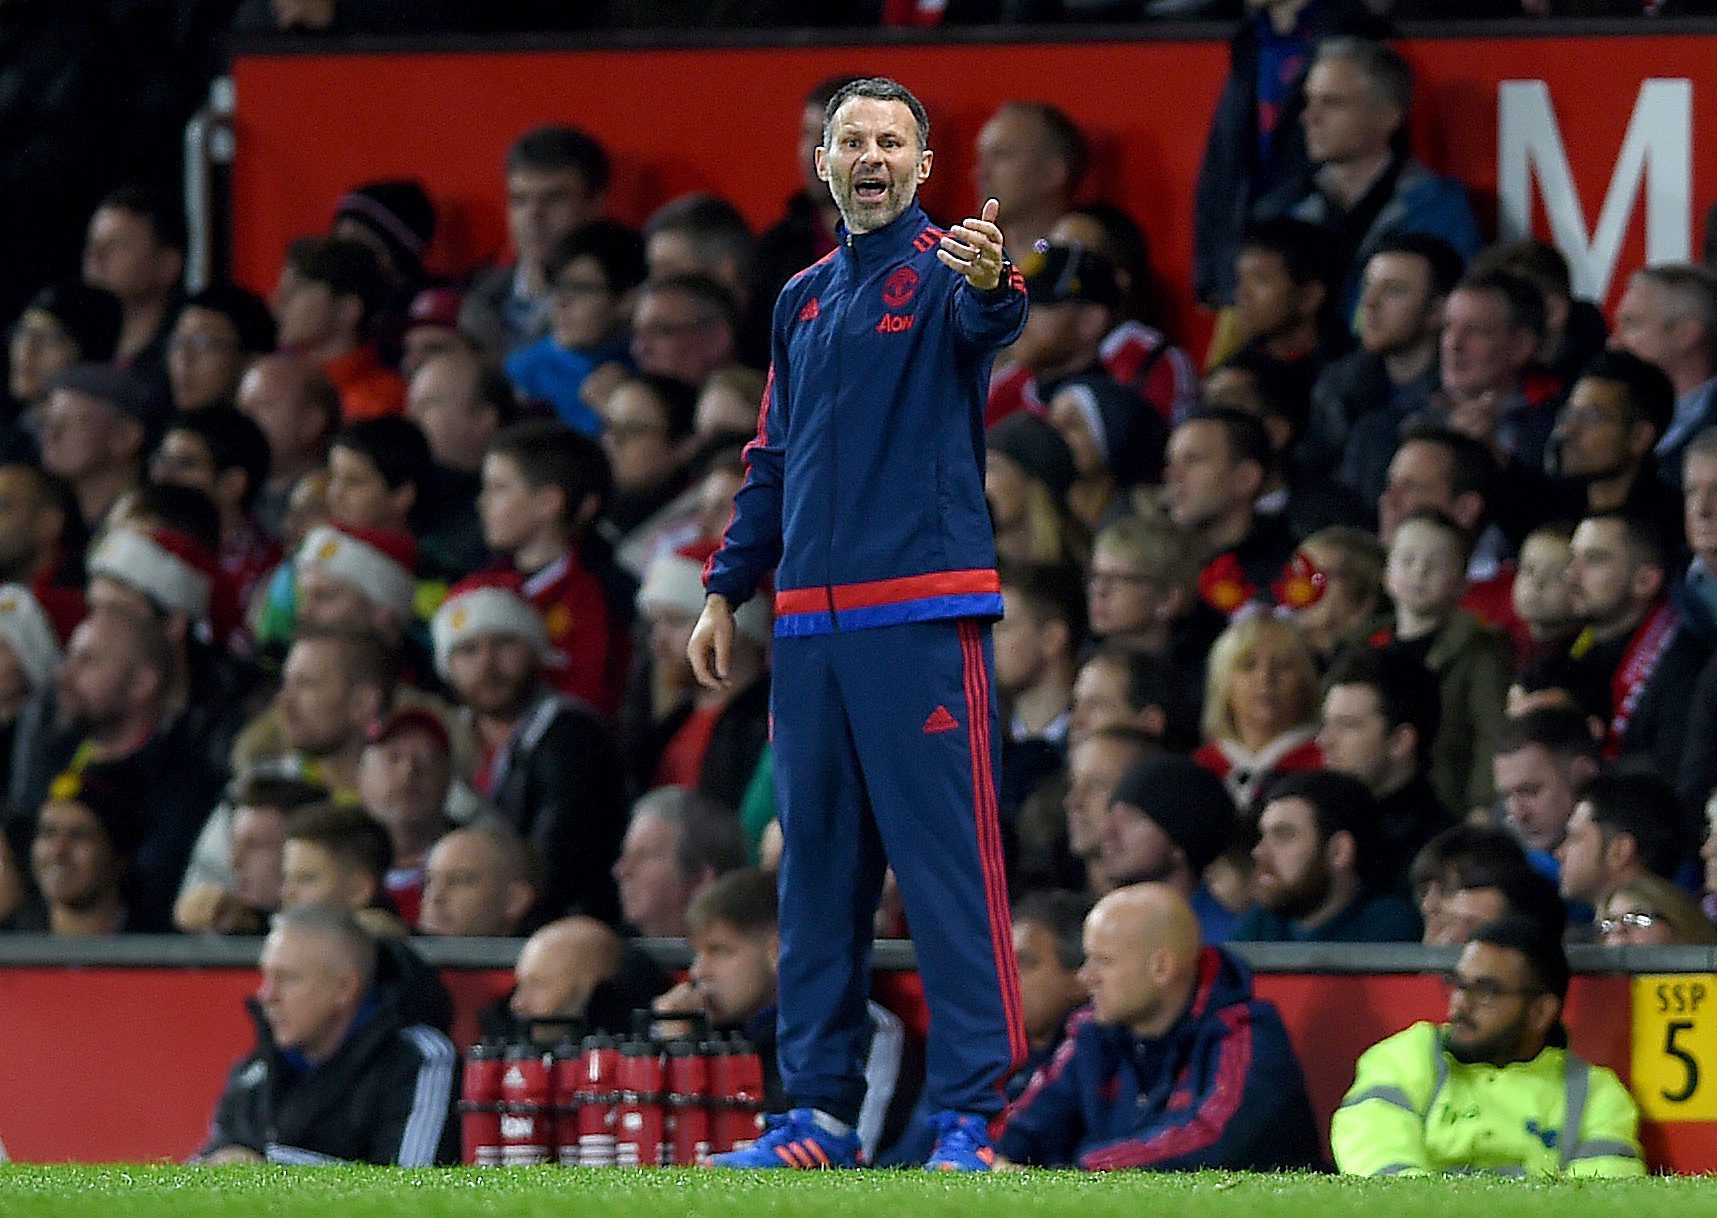 Manchester United assistant manager Ryan Giggs (C) reacts during the English Premier League soccer match between Manchester United and Norwich City at Old Trafford, Manchester, Britain, 19 December 2015.  (Photo by Peter Powell/EPA)